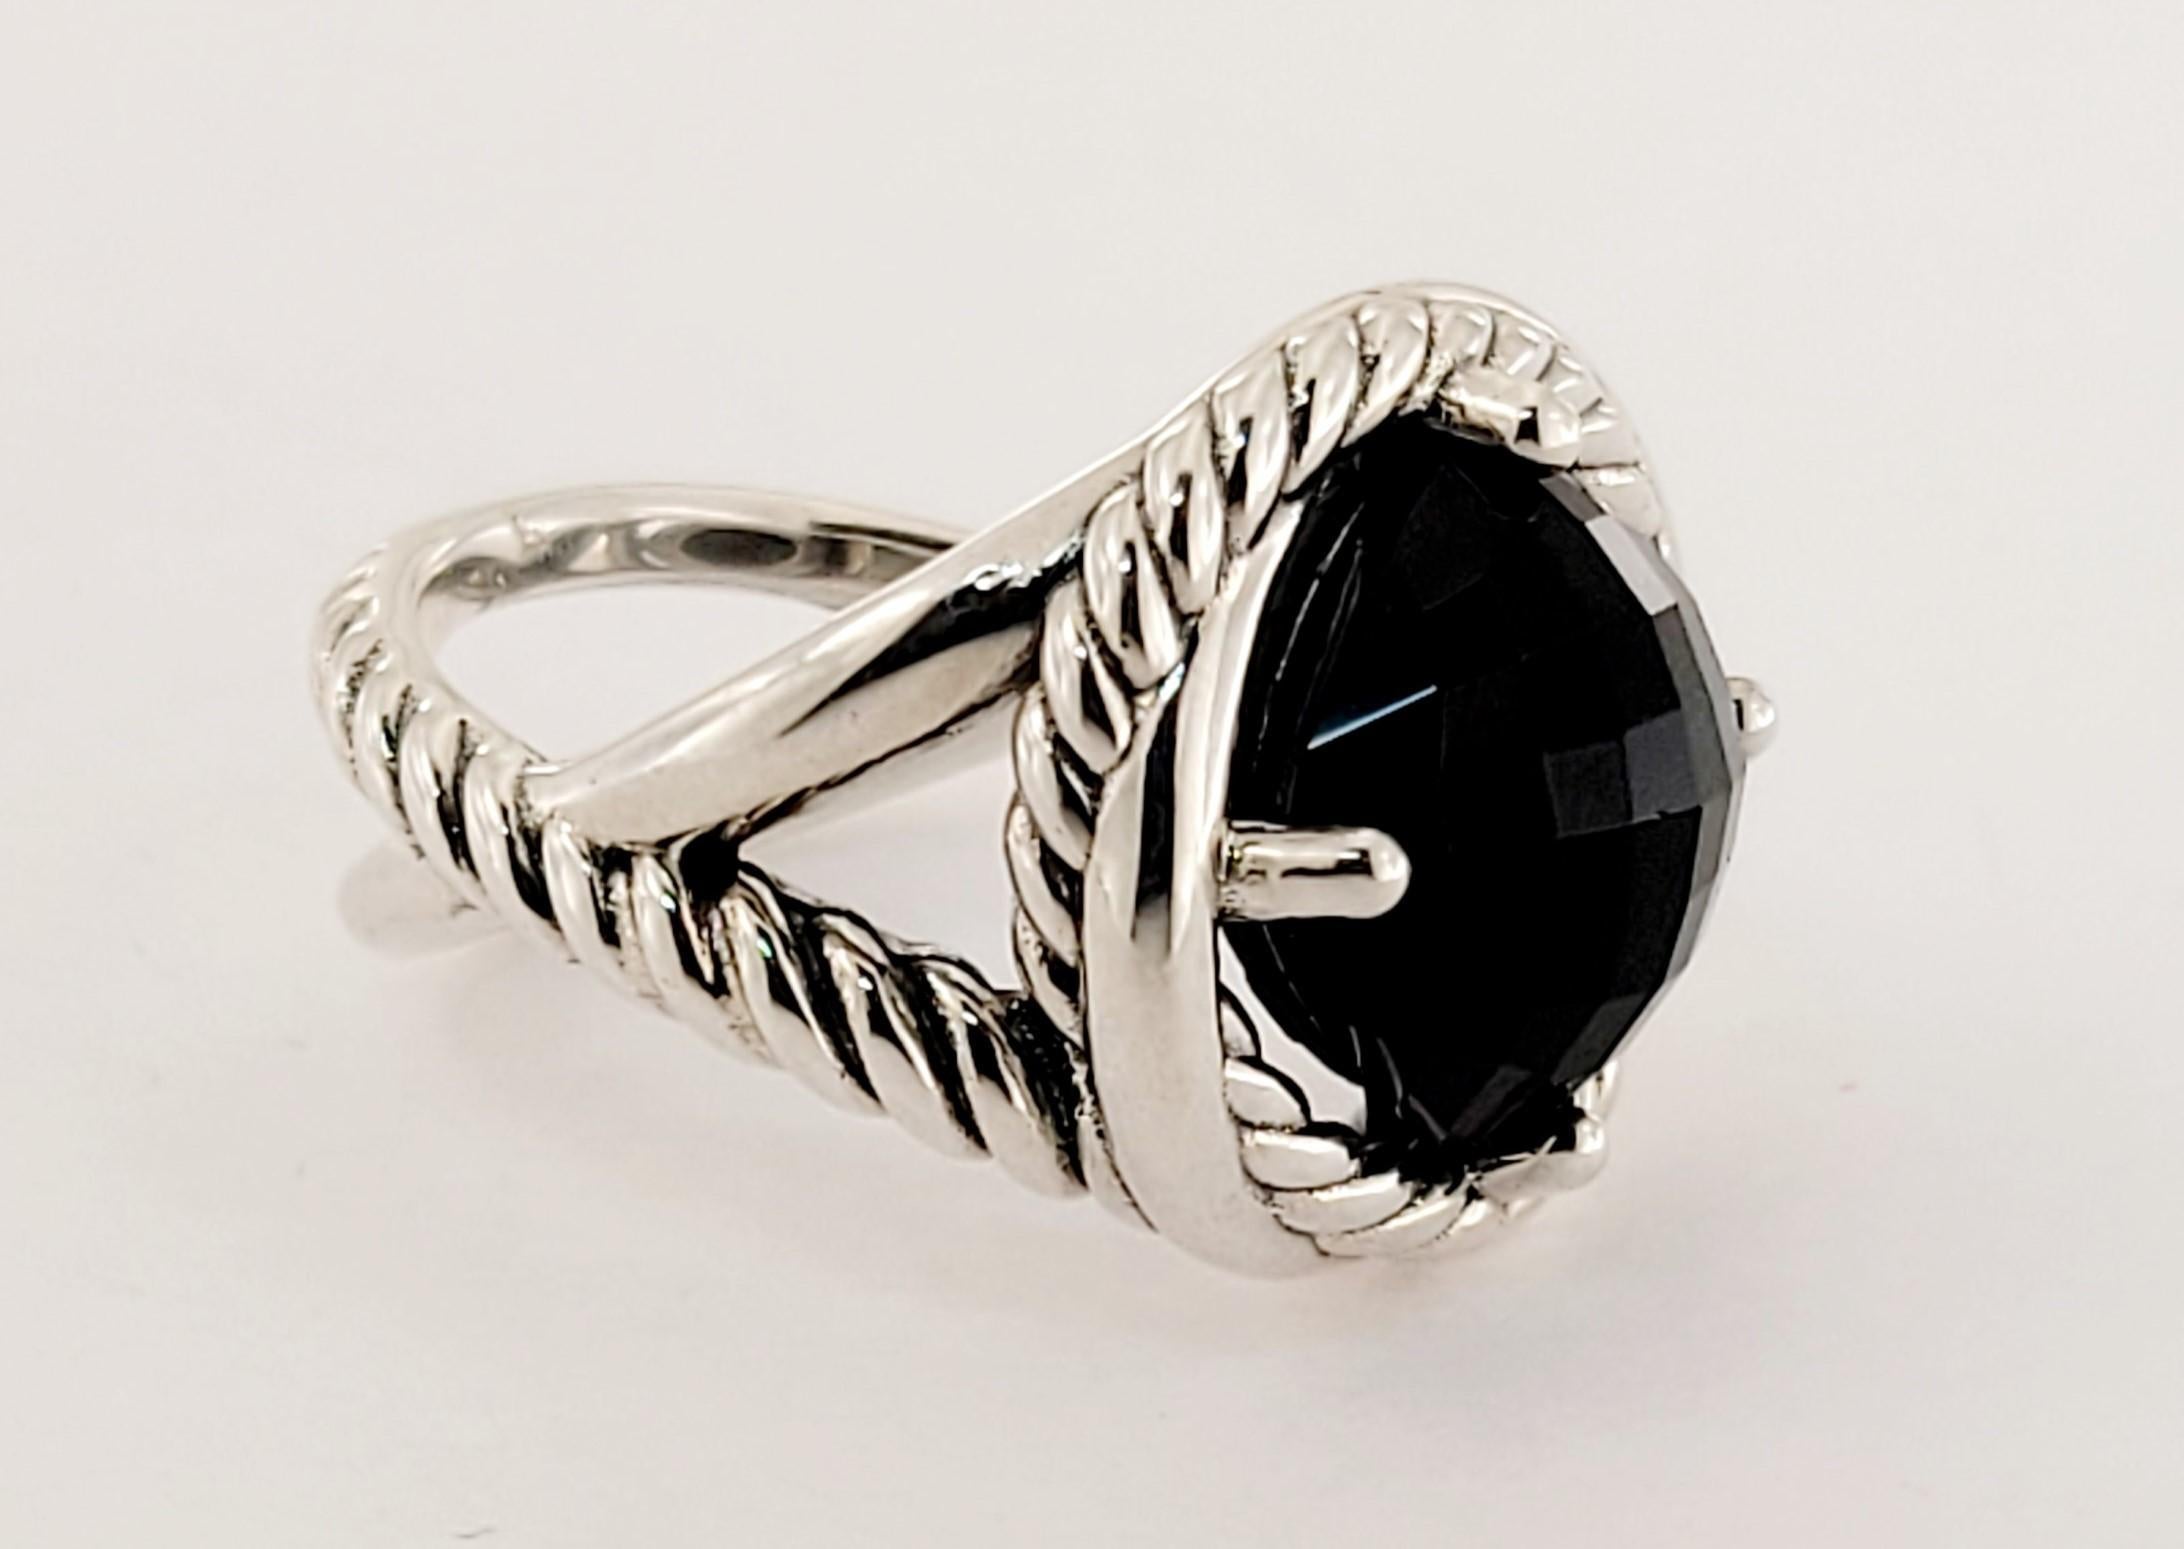 Brand David Yurman
Condition Never worn
Gender women
Material Sterling silver
11mm Infiniti black onyx 
Ring size 6
weight 9.5gr
Comes with David Yurman pouch